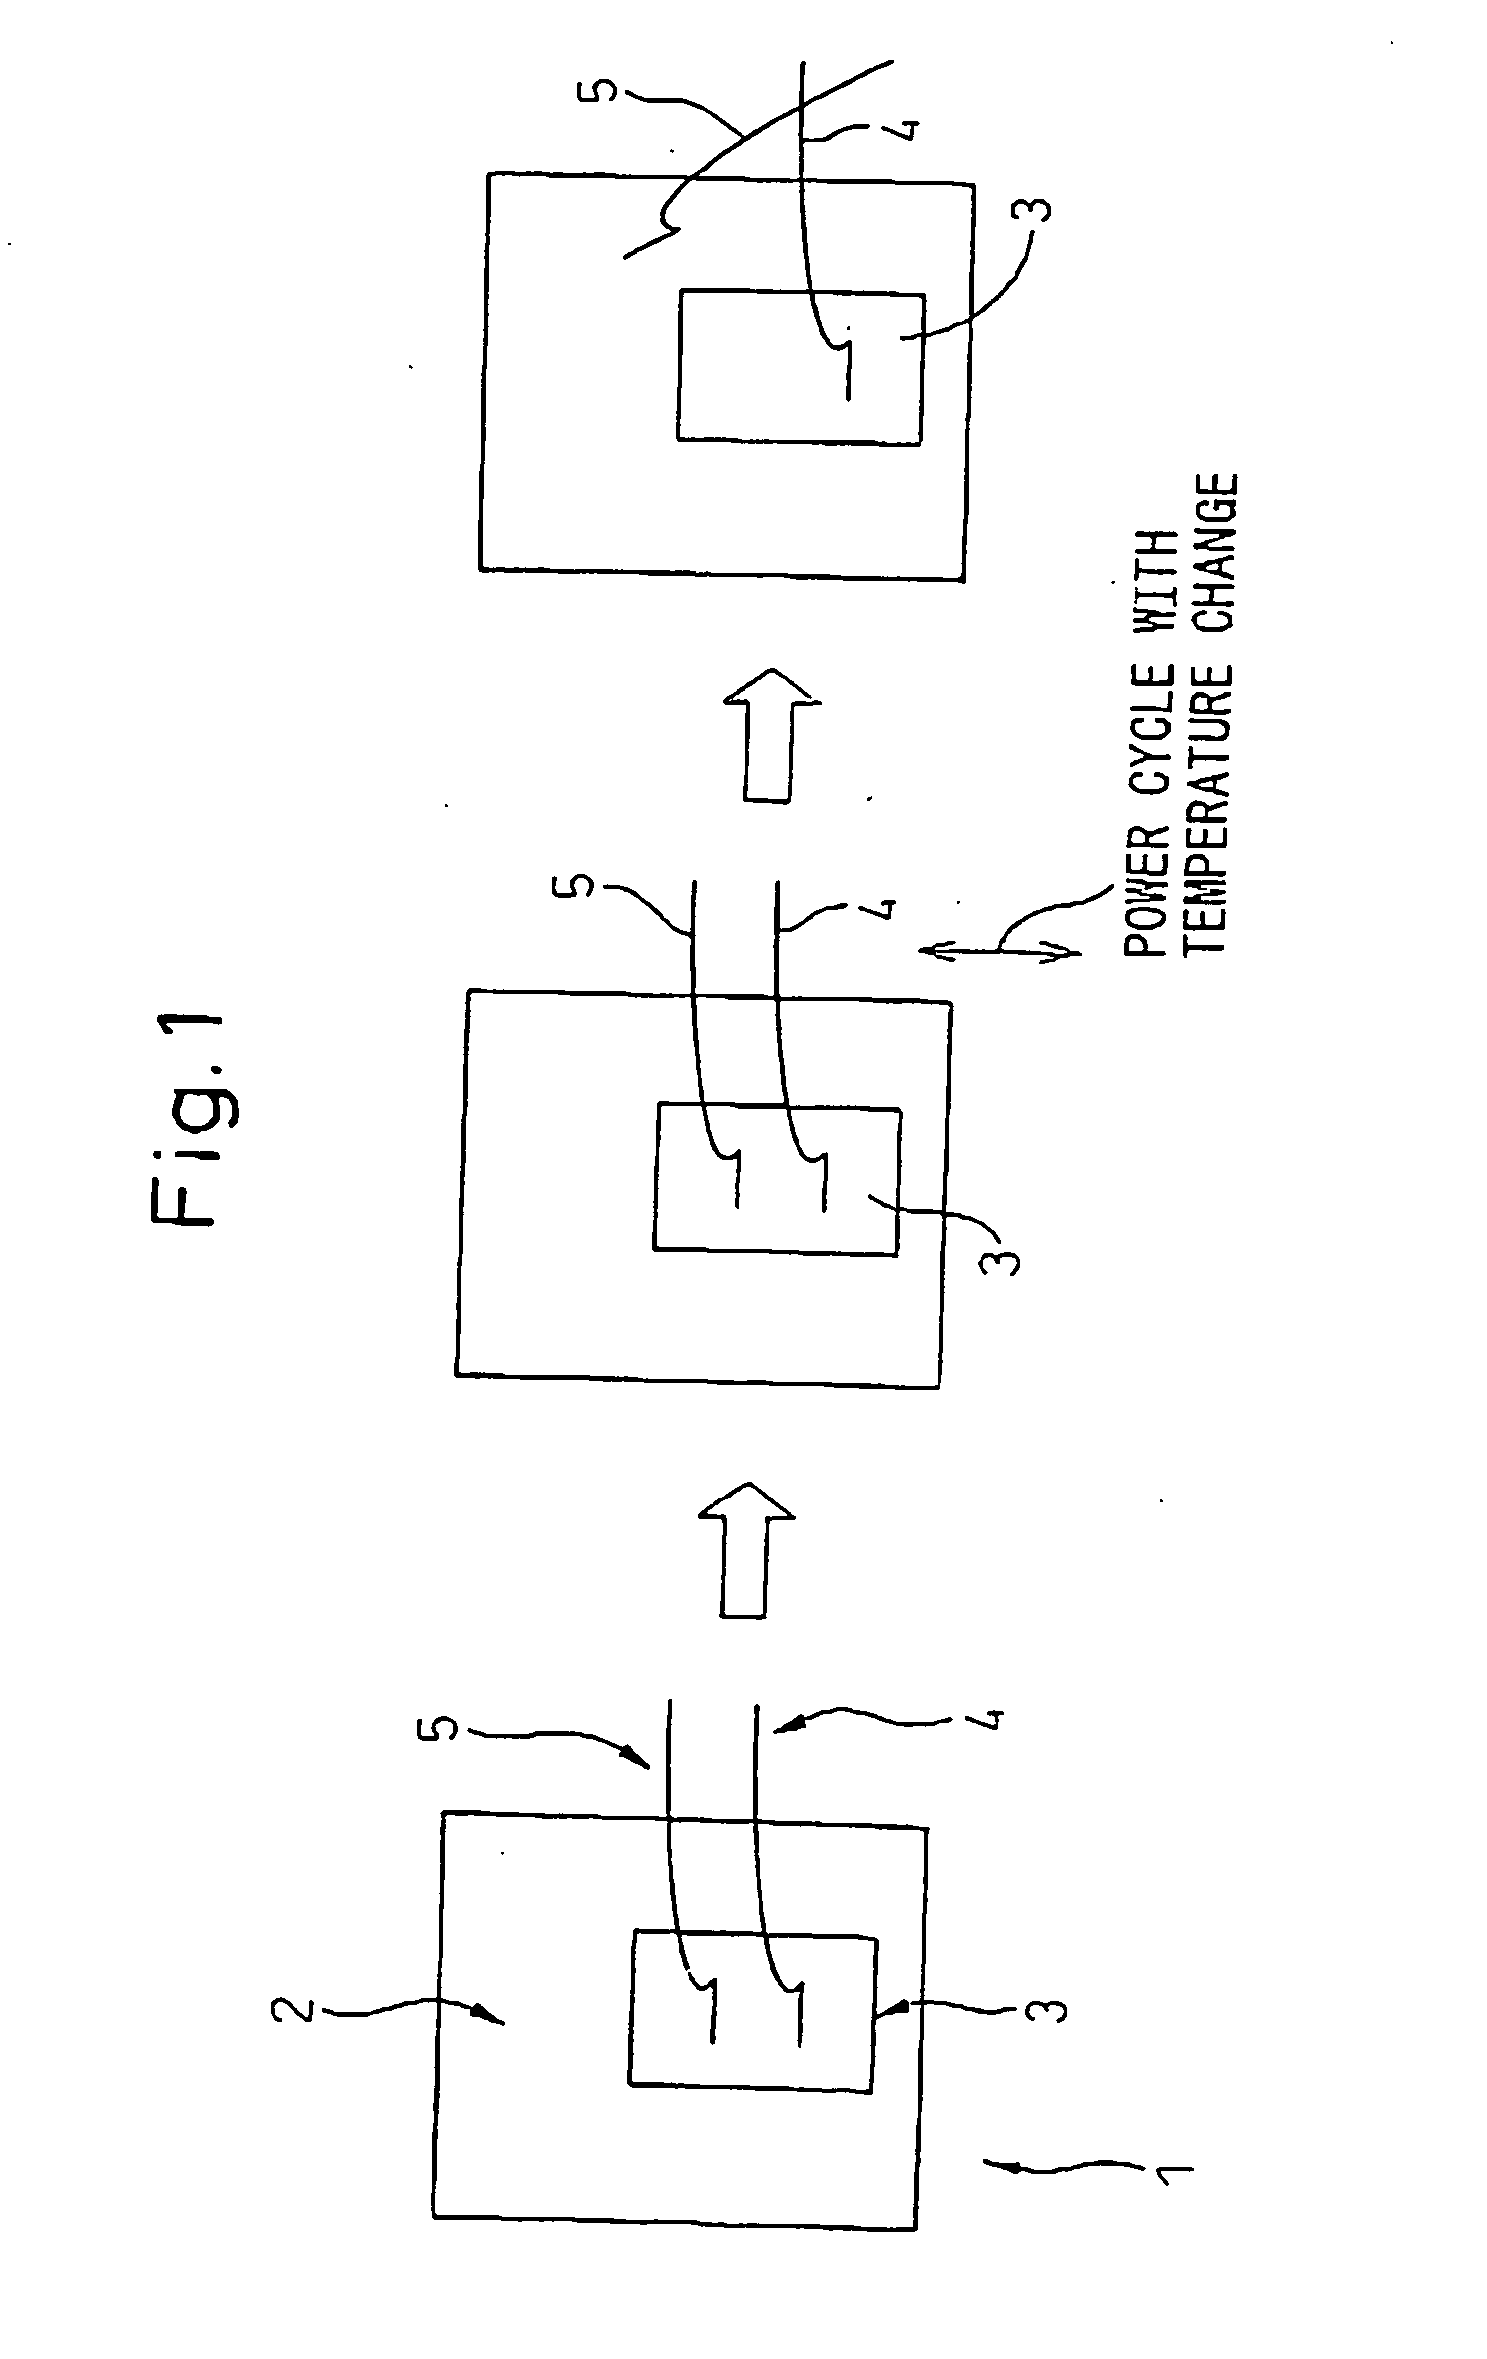 Motor driving system having power semiconductor module life detection function